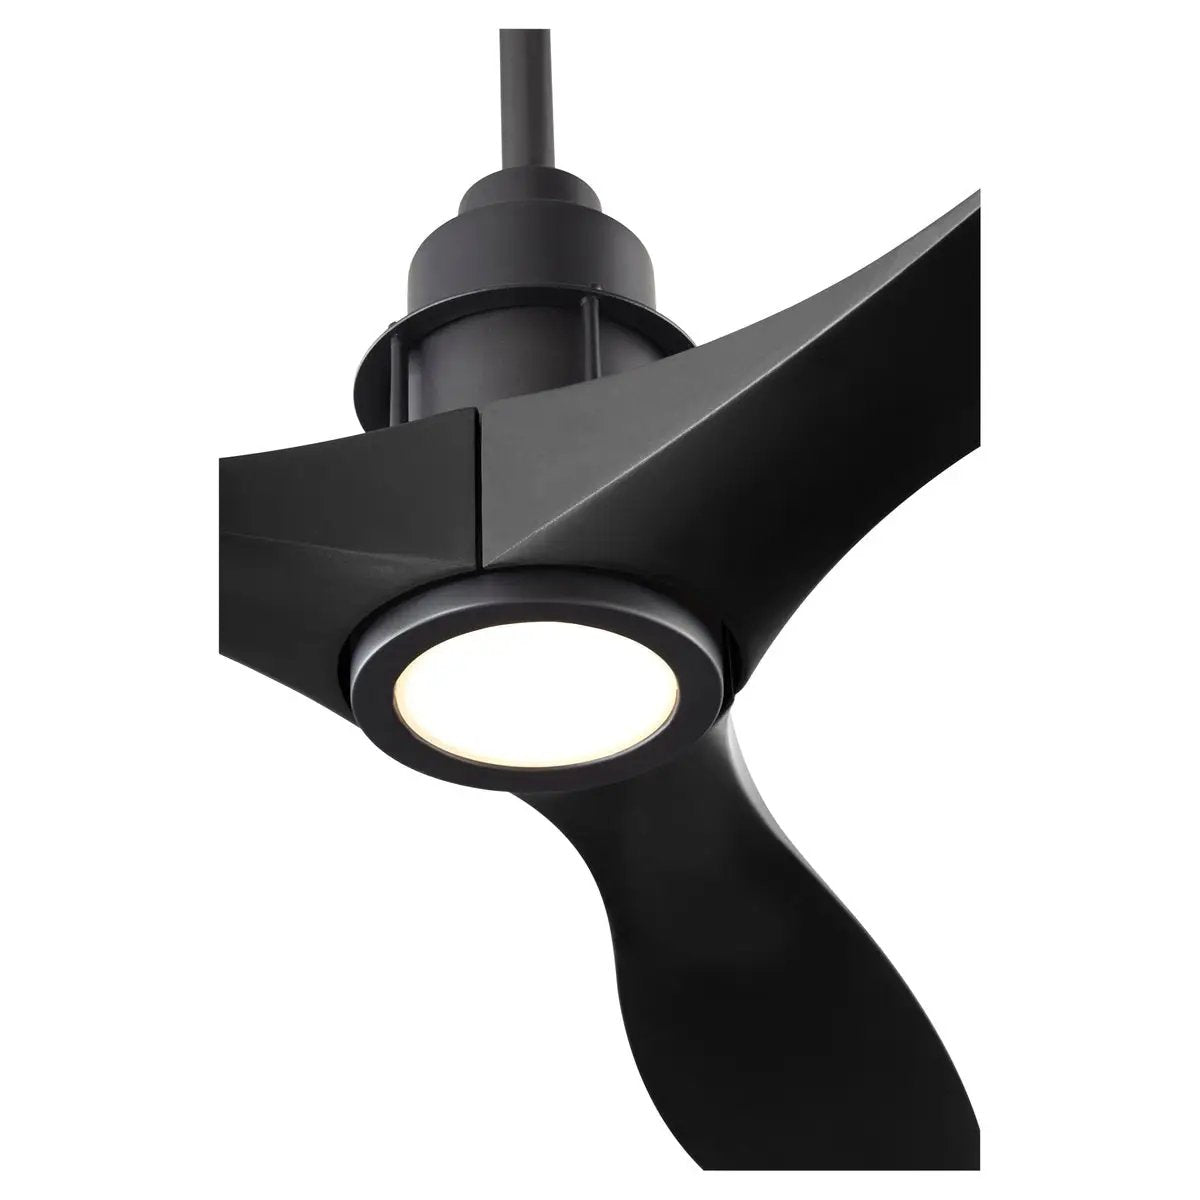 A sleek, modern ceiling fan with a light. Chrome stained housing and monochromatic blades deliver powerful air circulation.